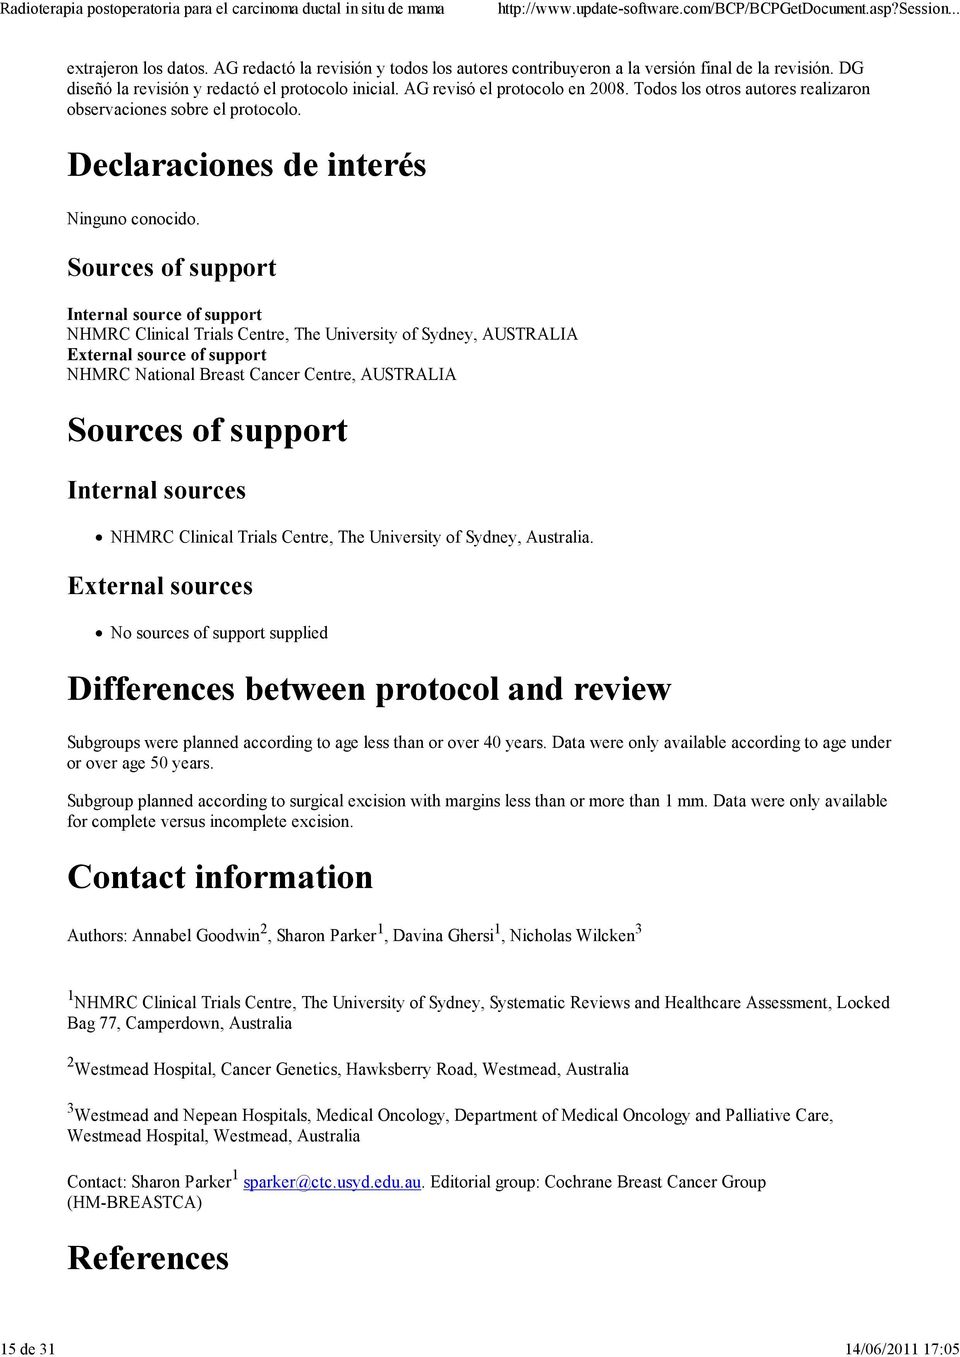 Sources of support Internal source of support NHMRC Clinical Trials Centre, The University of Sydney, AUSTRALIA External source of support NHMRC National Breast Cancer Centre, AUSTRALIA Sources of